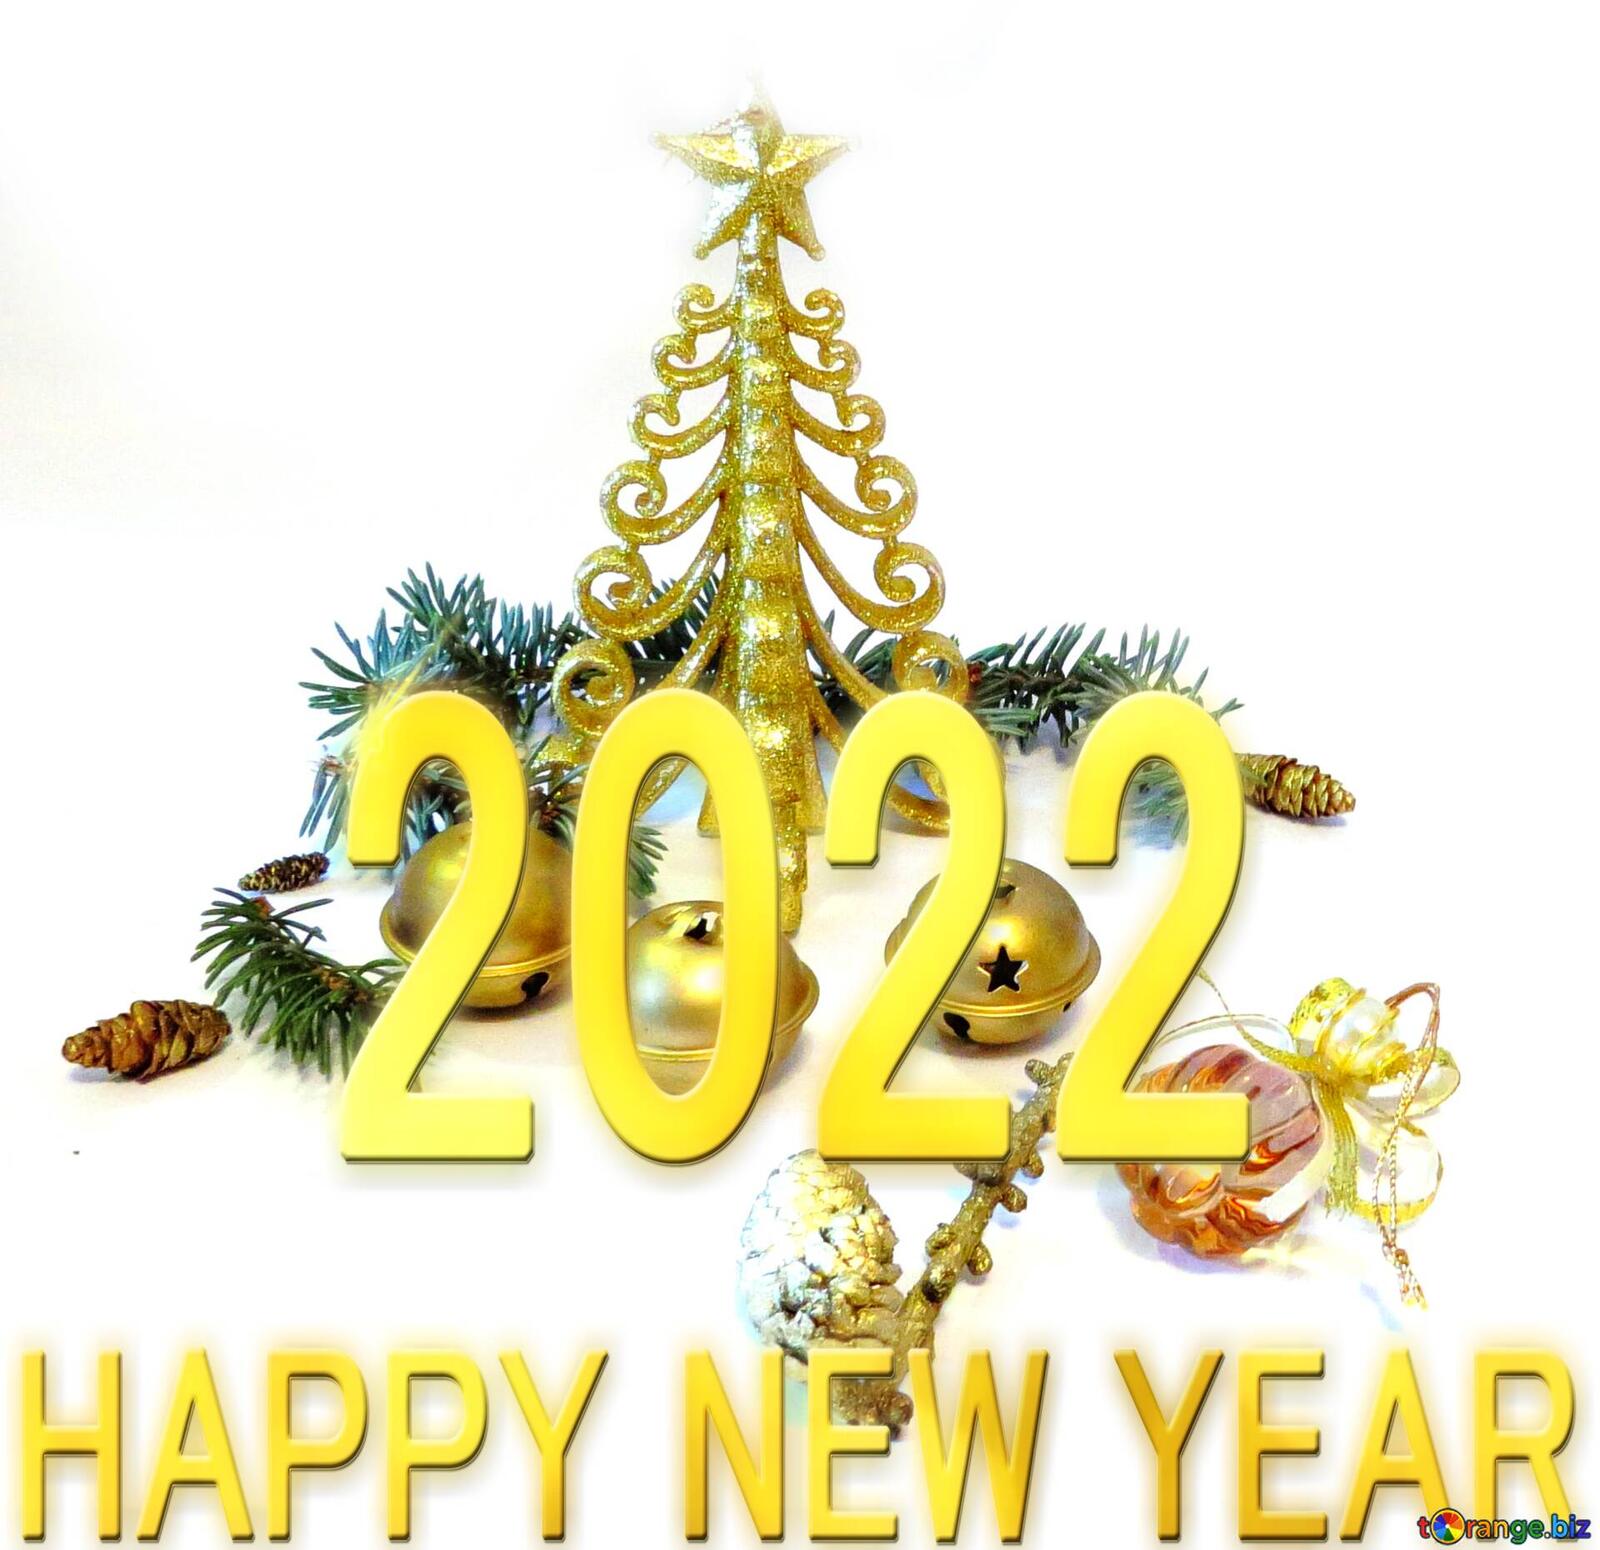 Wallpapers happy new year 2022 new year 2022 congratulations on the year 2022 on the desktop